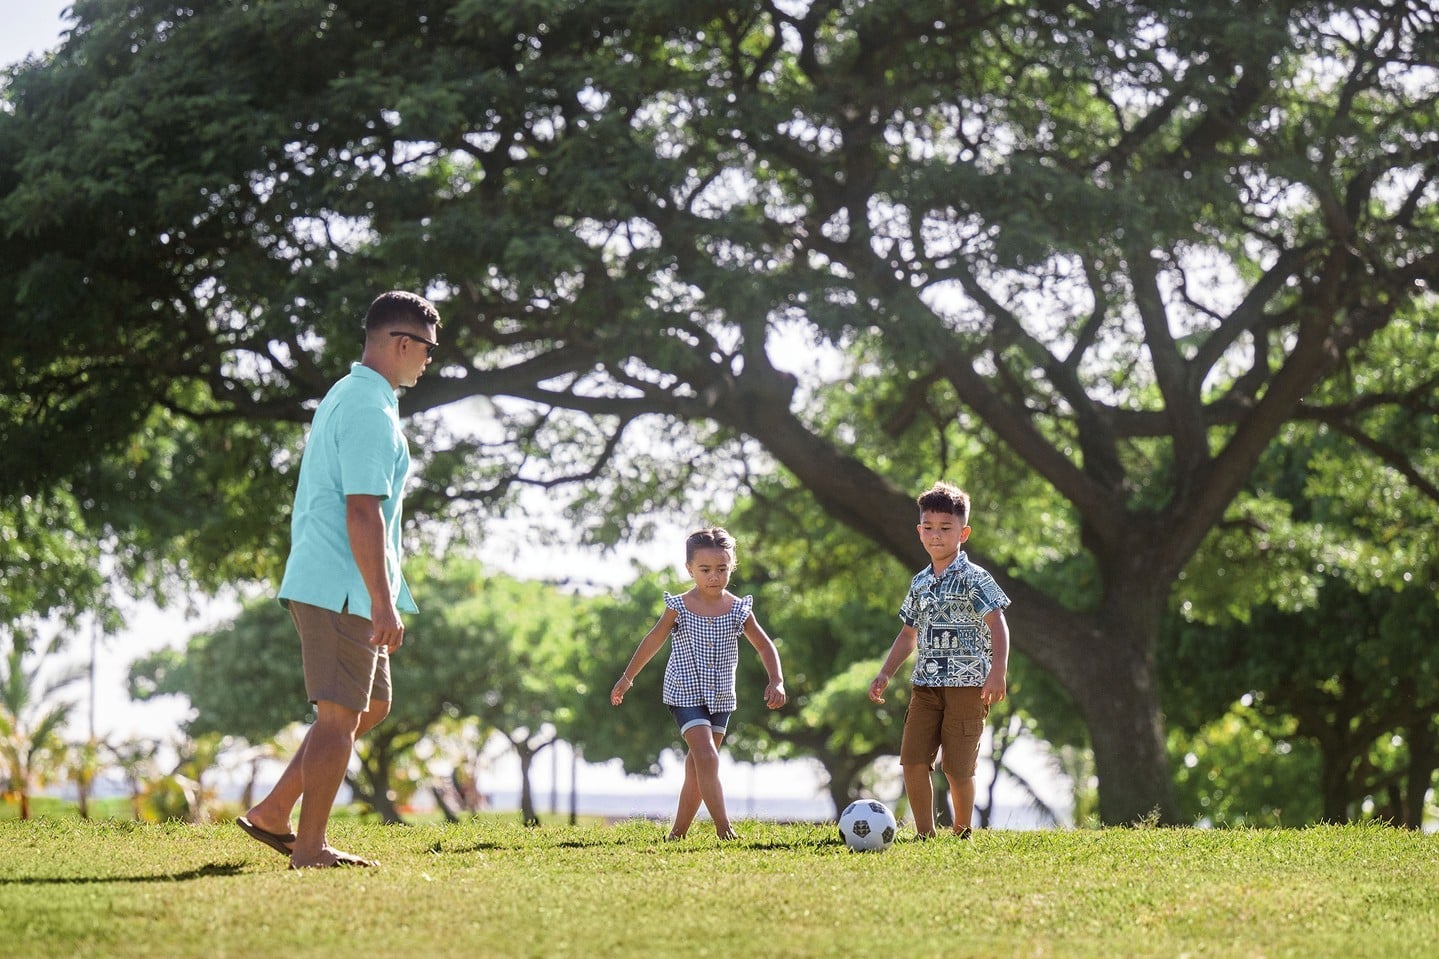 At Ward Village, discover a thriving neighborhood where you can unwind in your choice of parks, enjoy a picnic under a shady tree, play your favorite sport or simply do more of what you love.